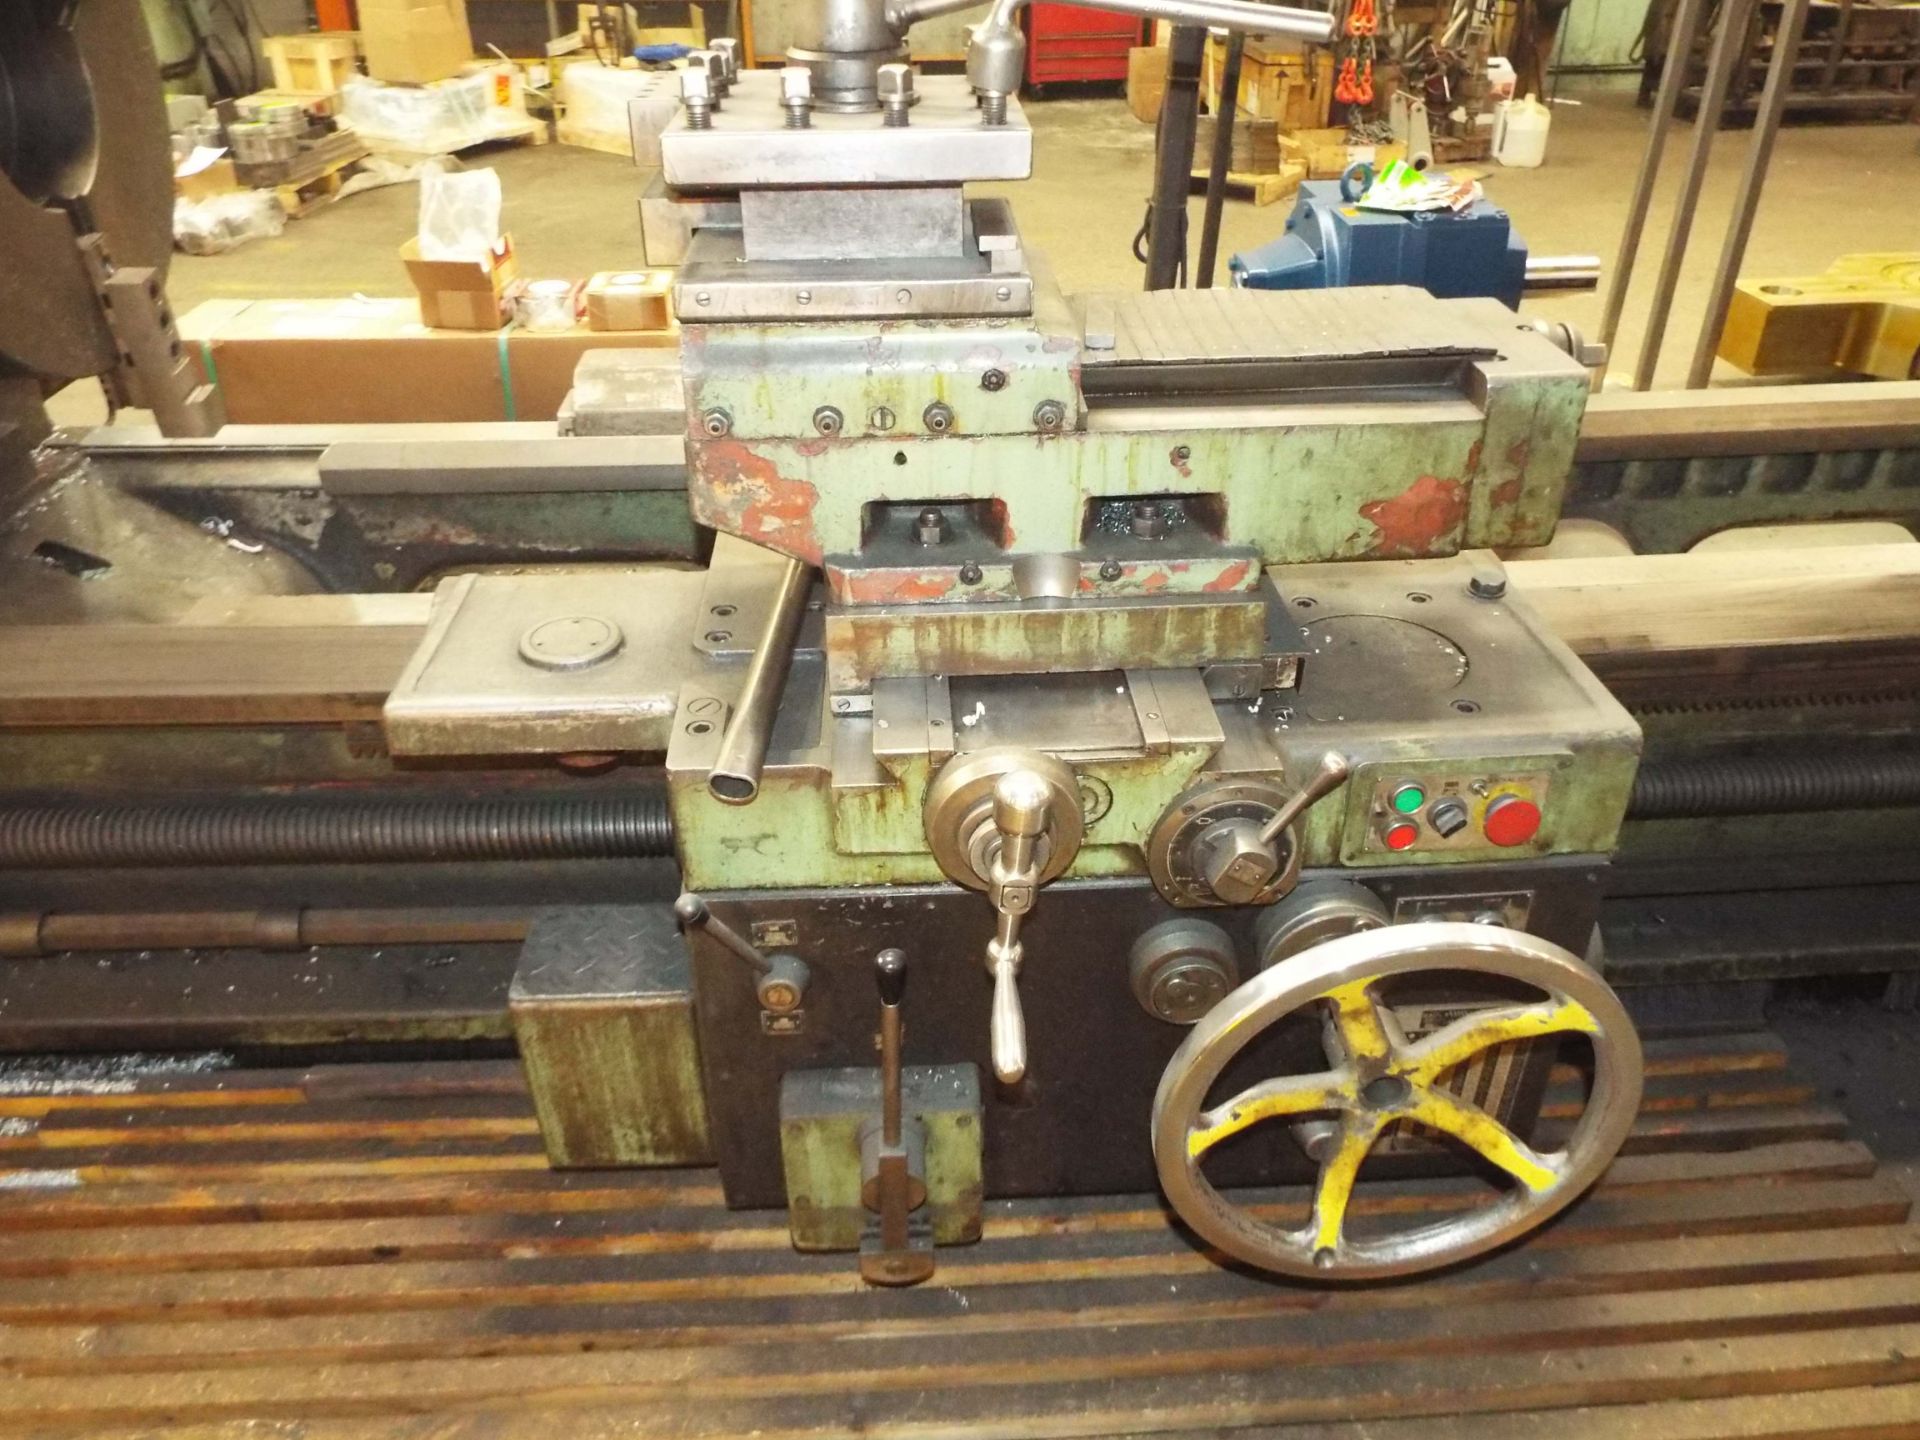 TOS CELAKOVICE SU100 LATHE WITH 48" SWING OVER BED, 204" DISTANCE BETWEEN CENTERS, 4" SPINDLE - Image 6 of 8